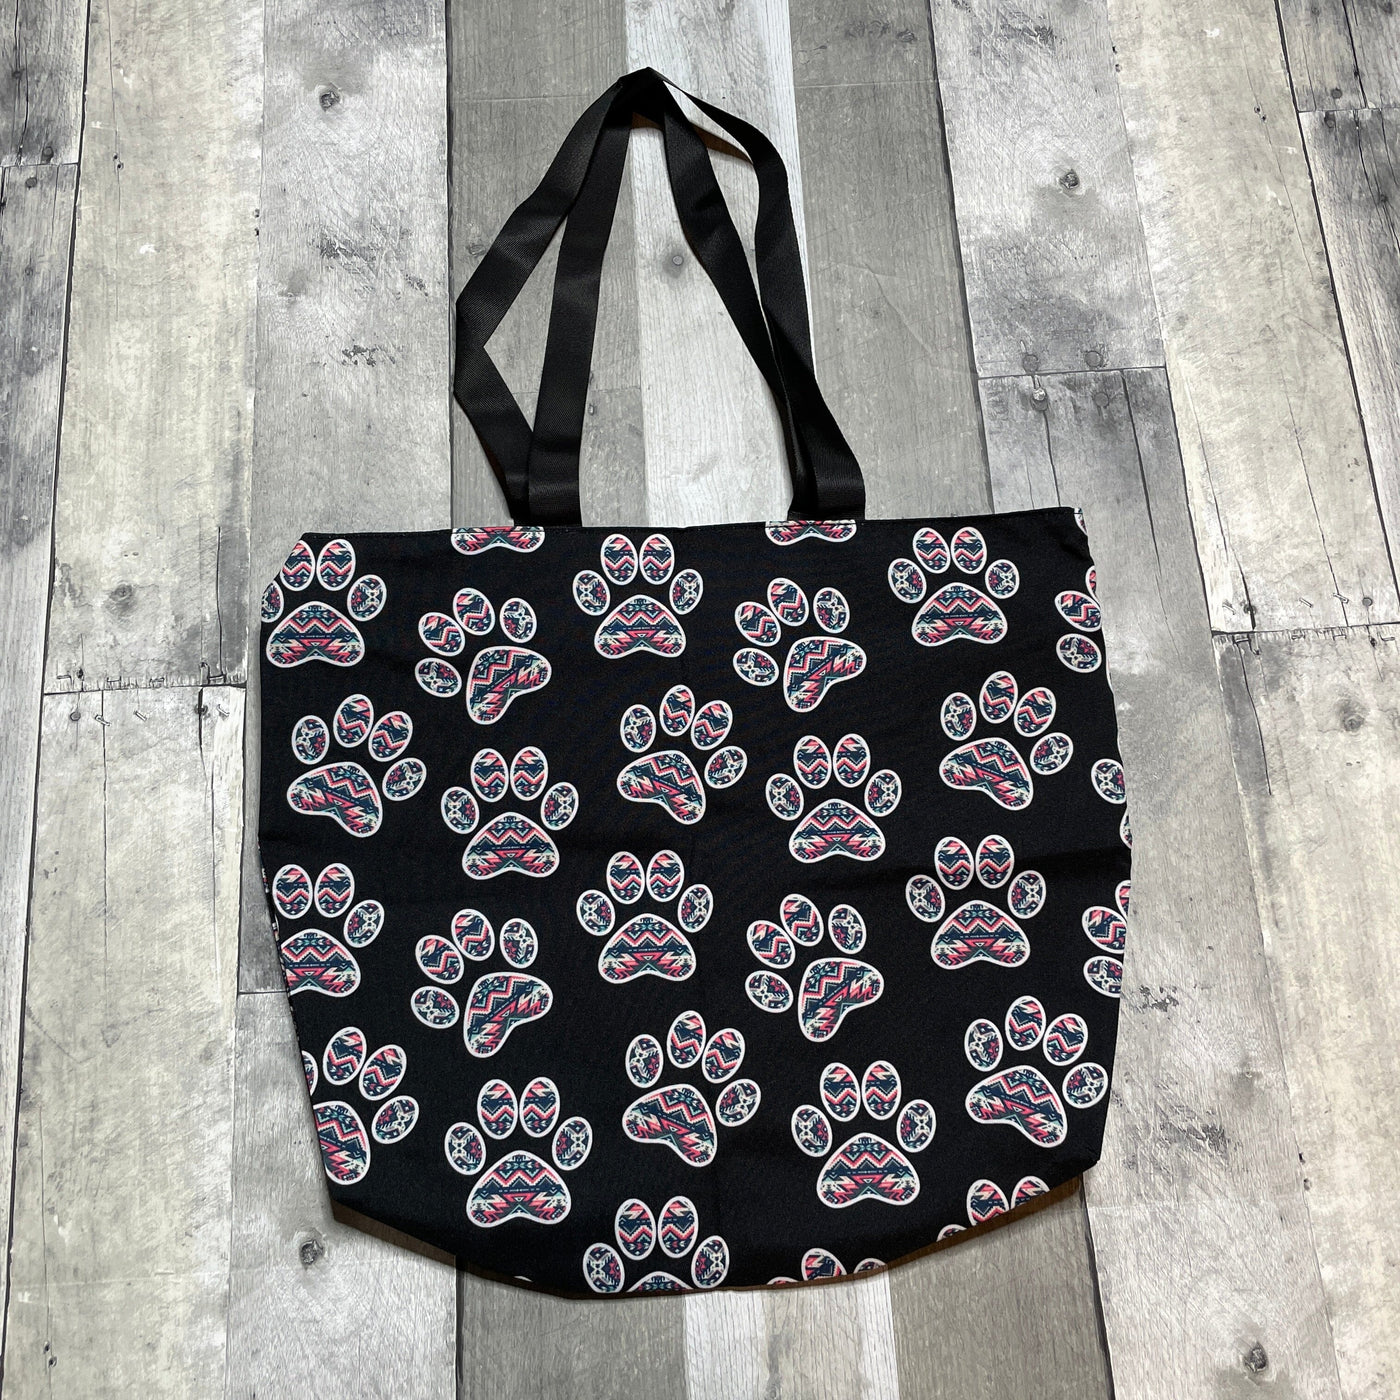 Canvas Tote Bags The Teal Bandit Paws 